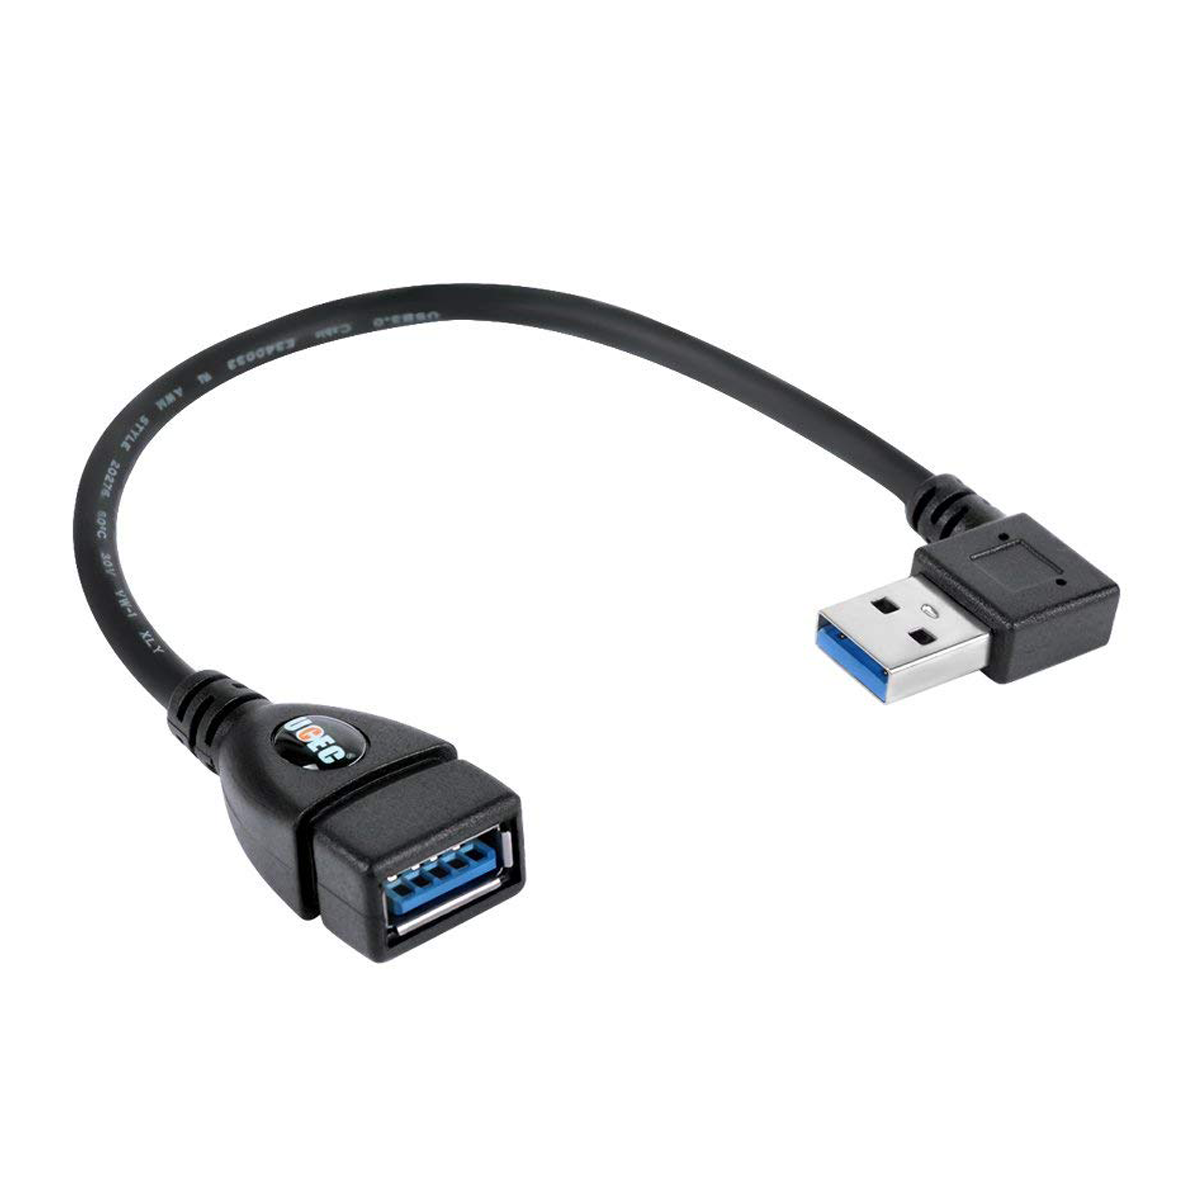 USB 3.0 extension cable for USB hub used for T11 2.0/ T11 2.5 /Eco Pro/ and T12LED Photo Booth